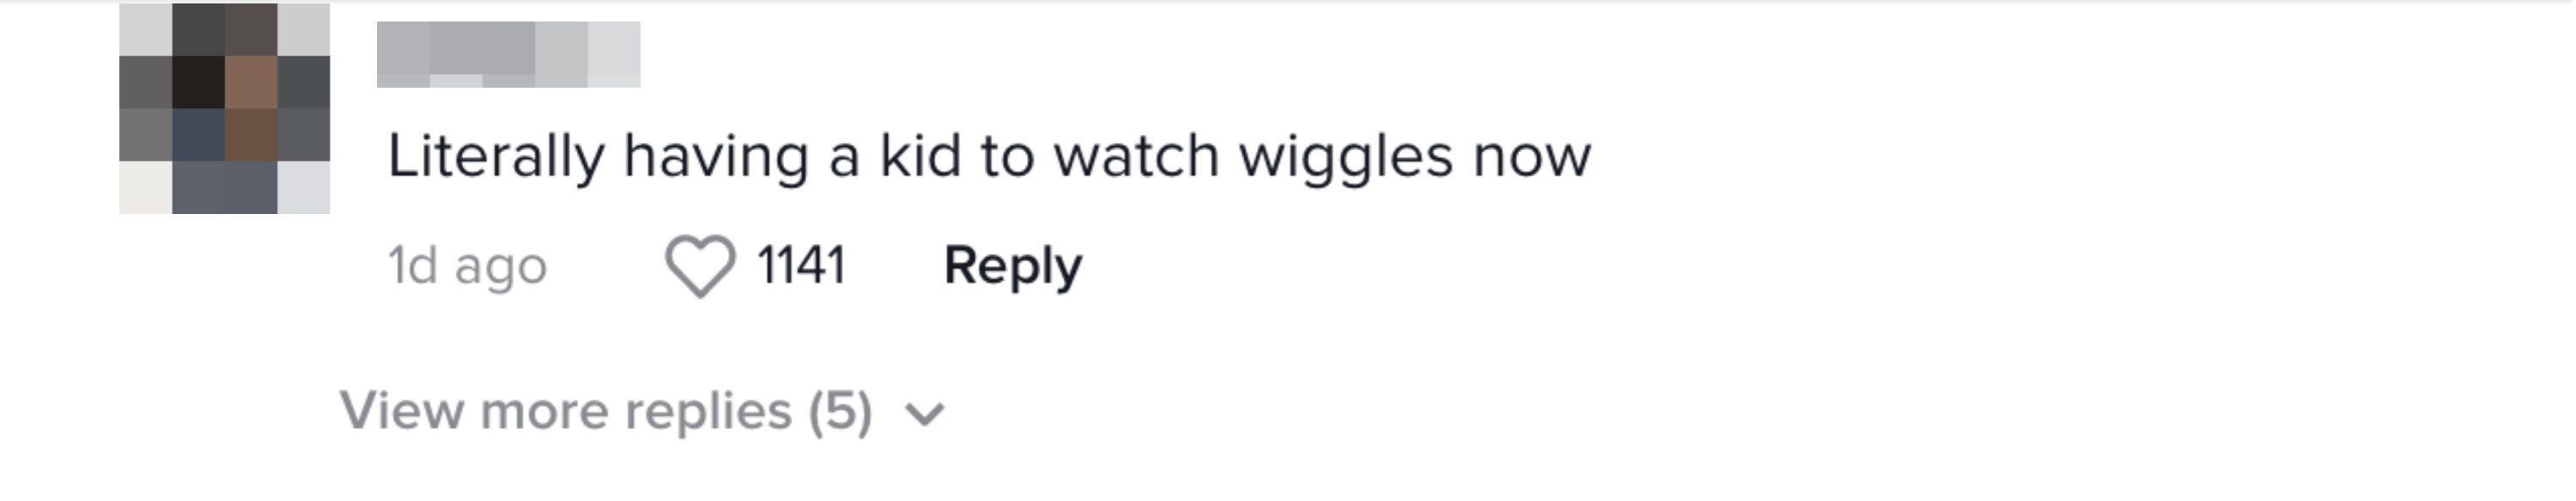 &quot;Literally having a kid to watch wiggles now&quot;